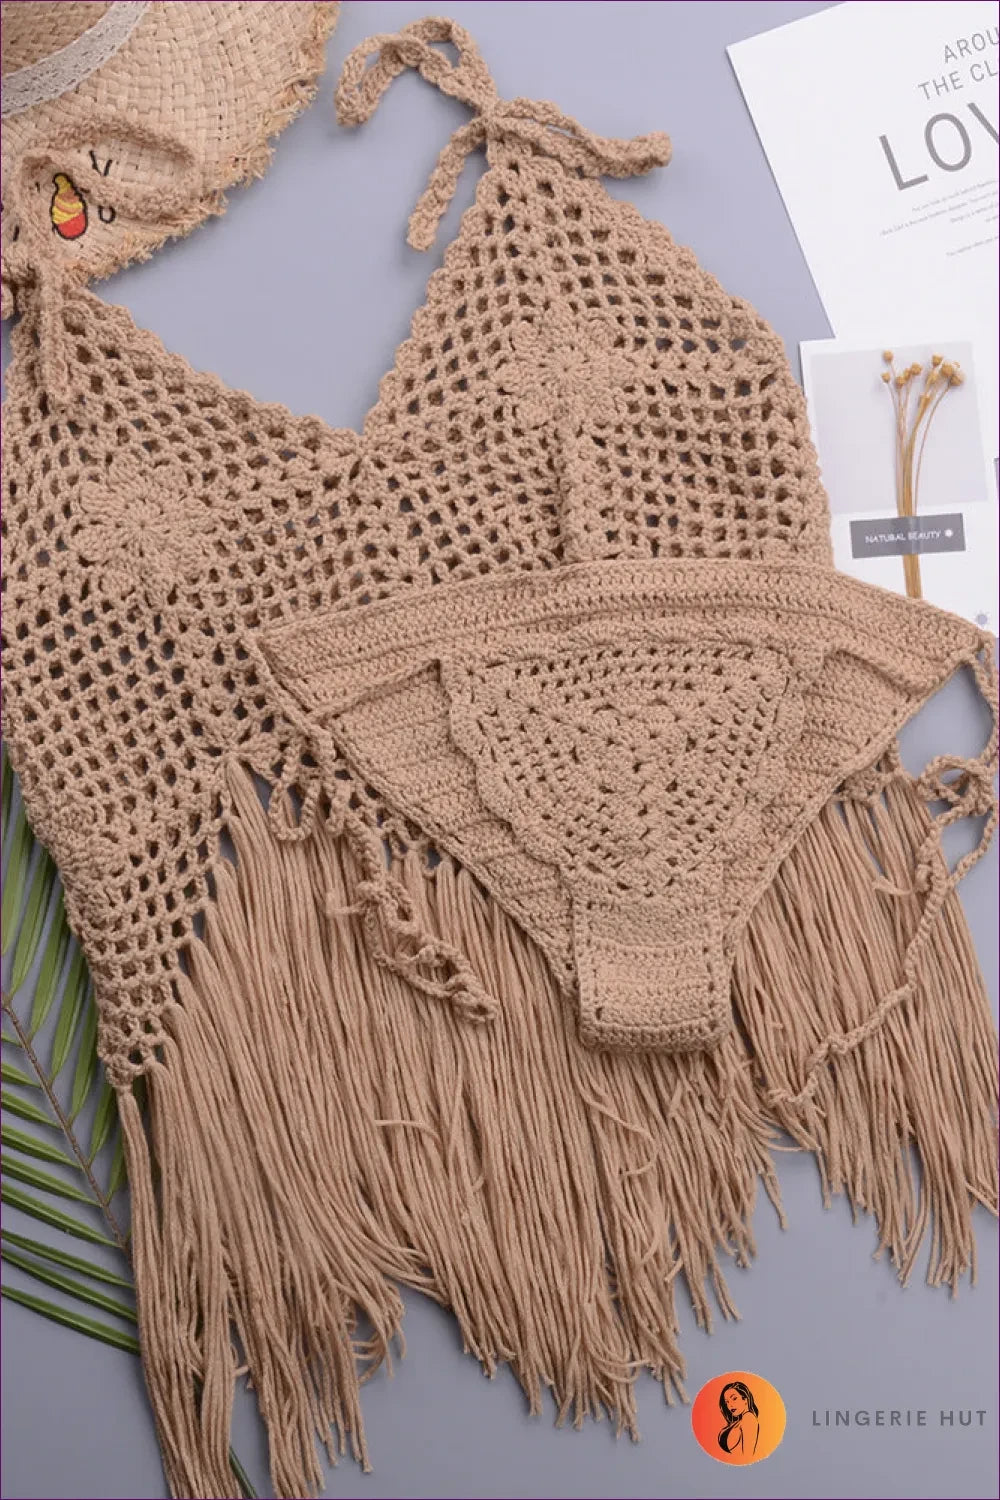 Unleash Your Boho Goddess With Our Handwoven Crochet Bikini - The Perfect Swimsuit Set To Elevate Beach Style.